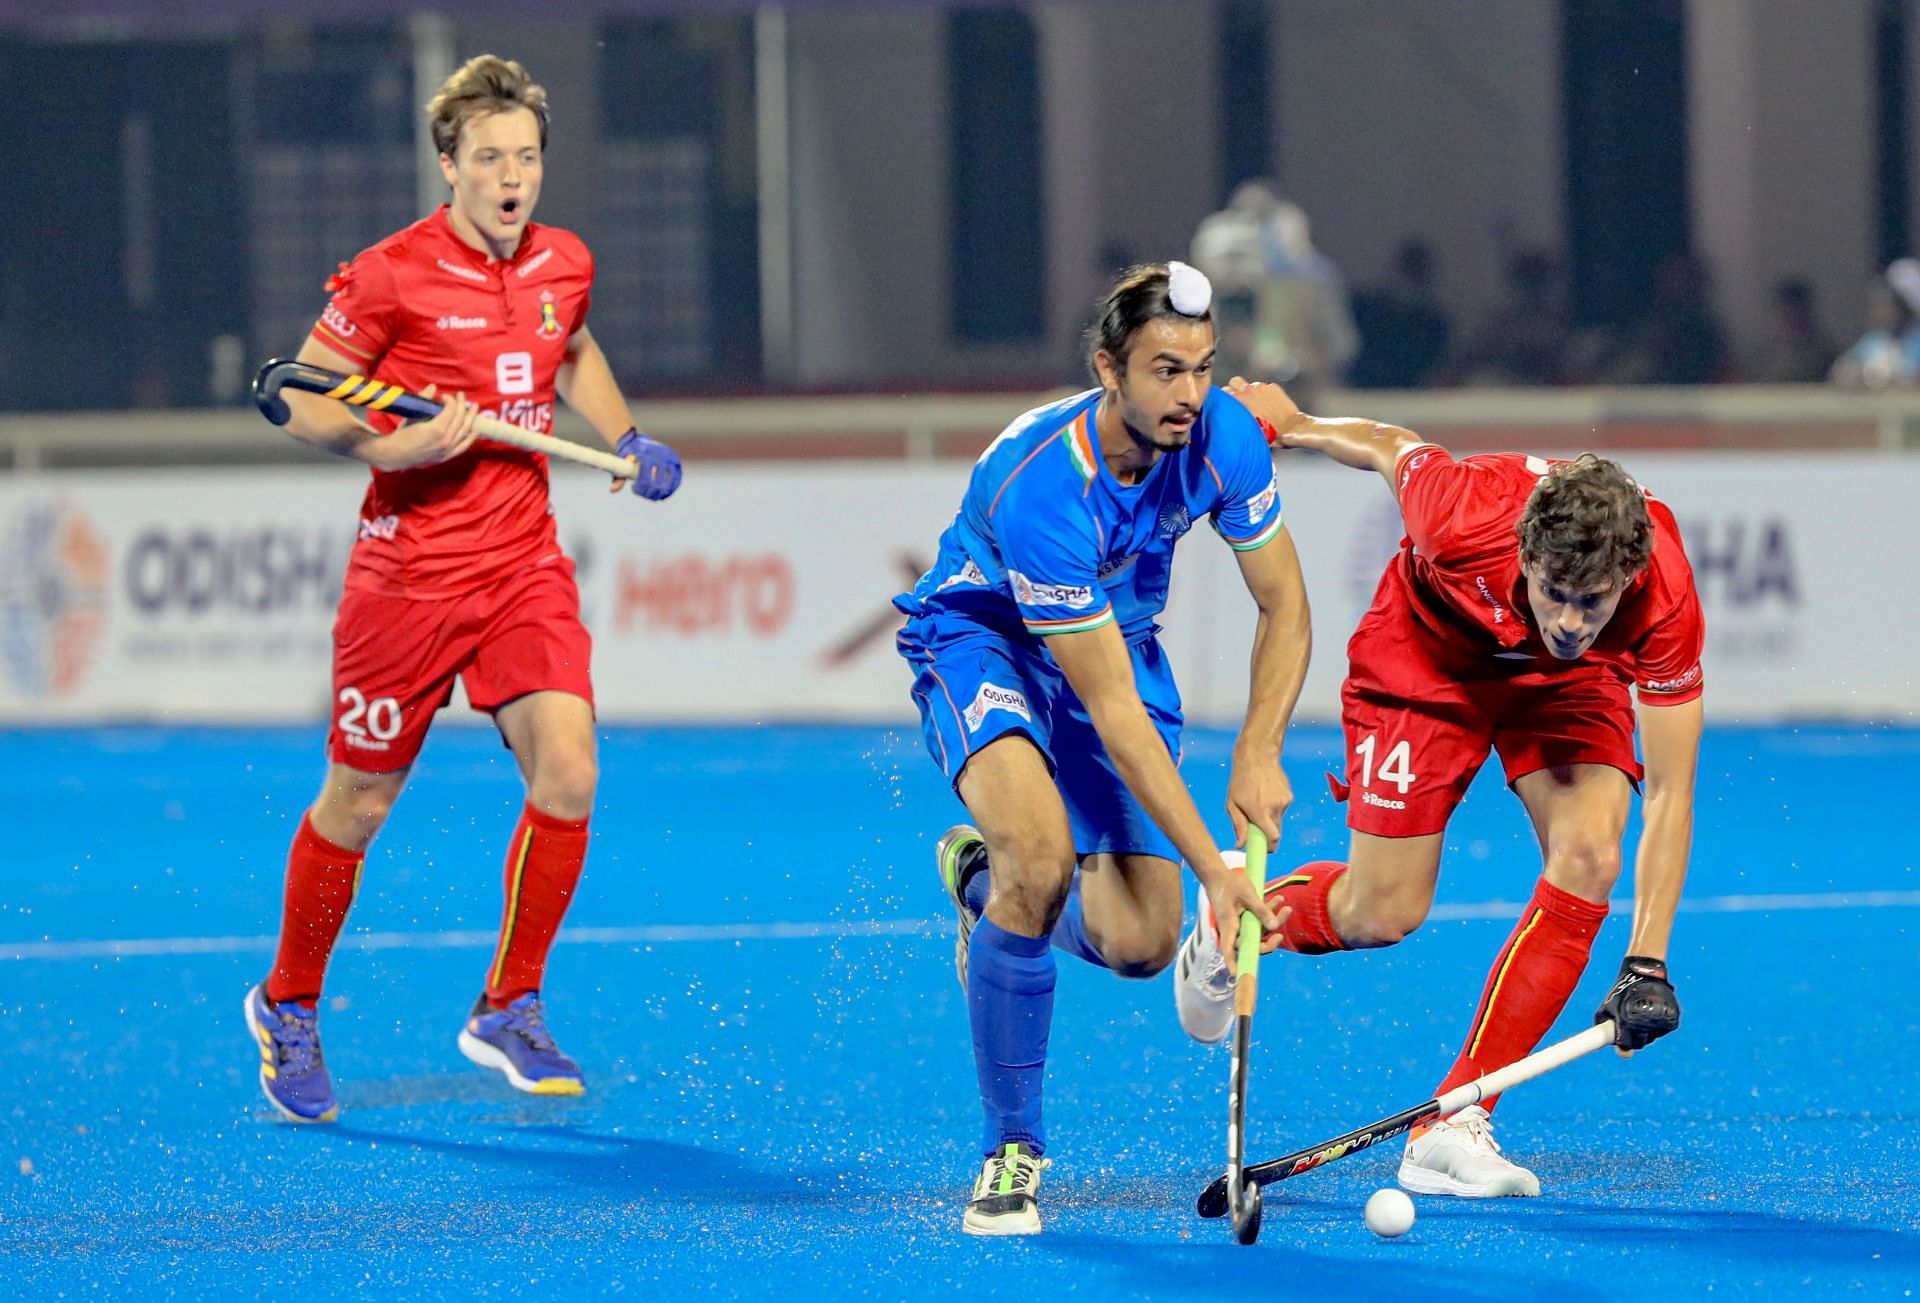 Action from the India vs Belgium match (Pic Credit: Hockey India)